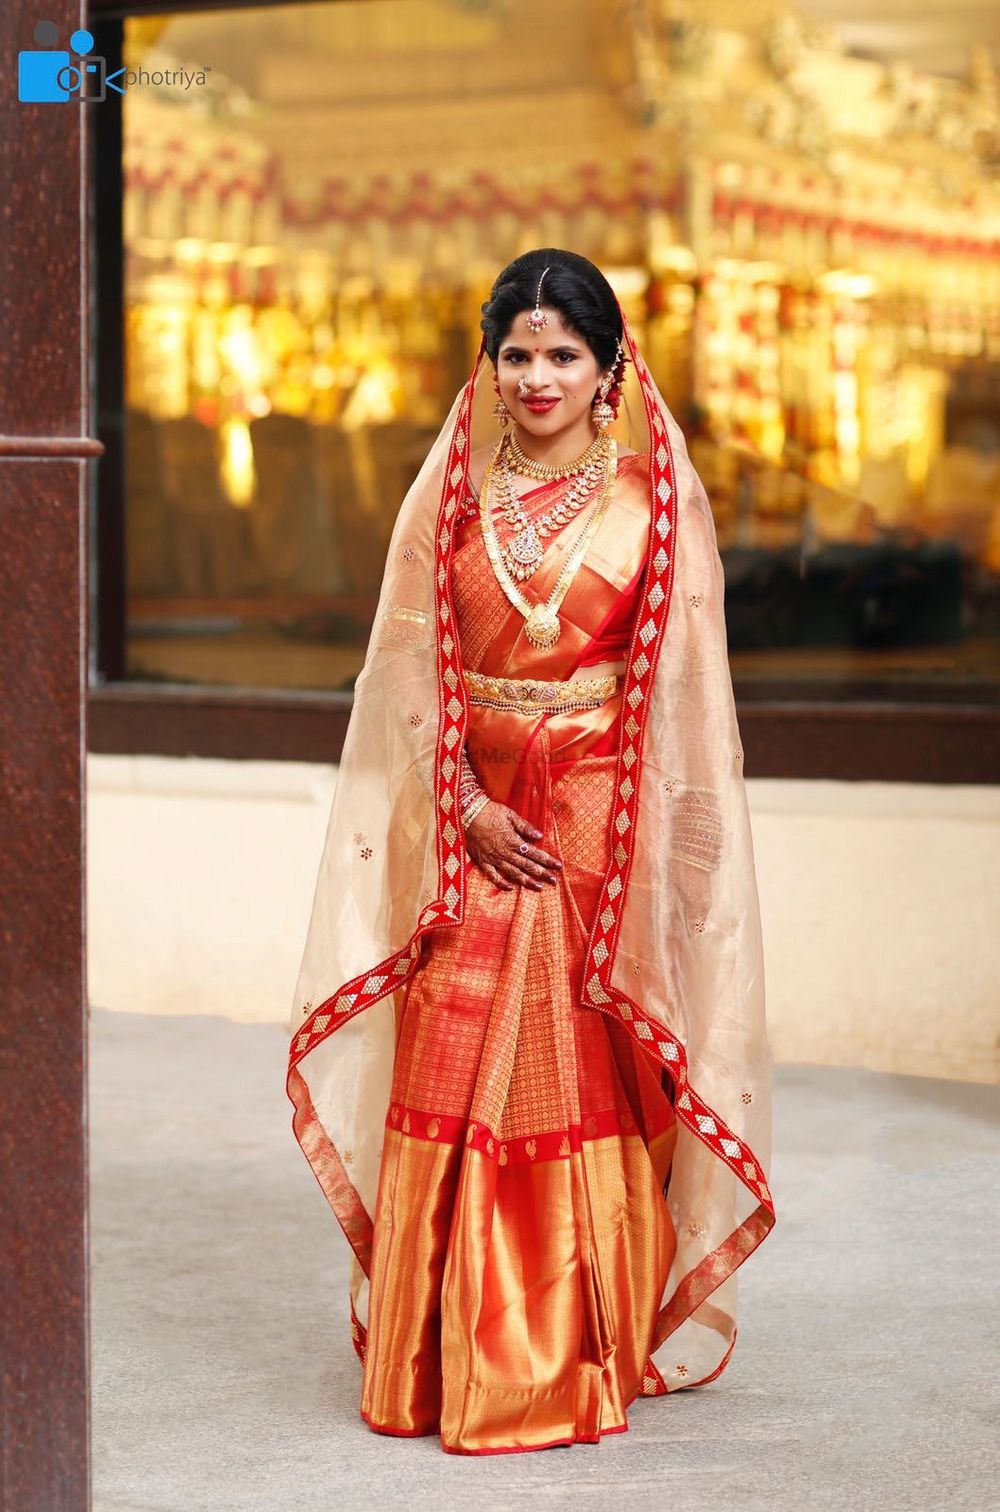 Photo of South Indian bridal look with red and gold kanjivaram and dupatta